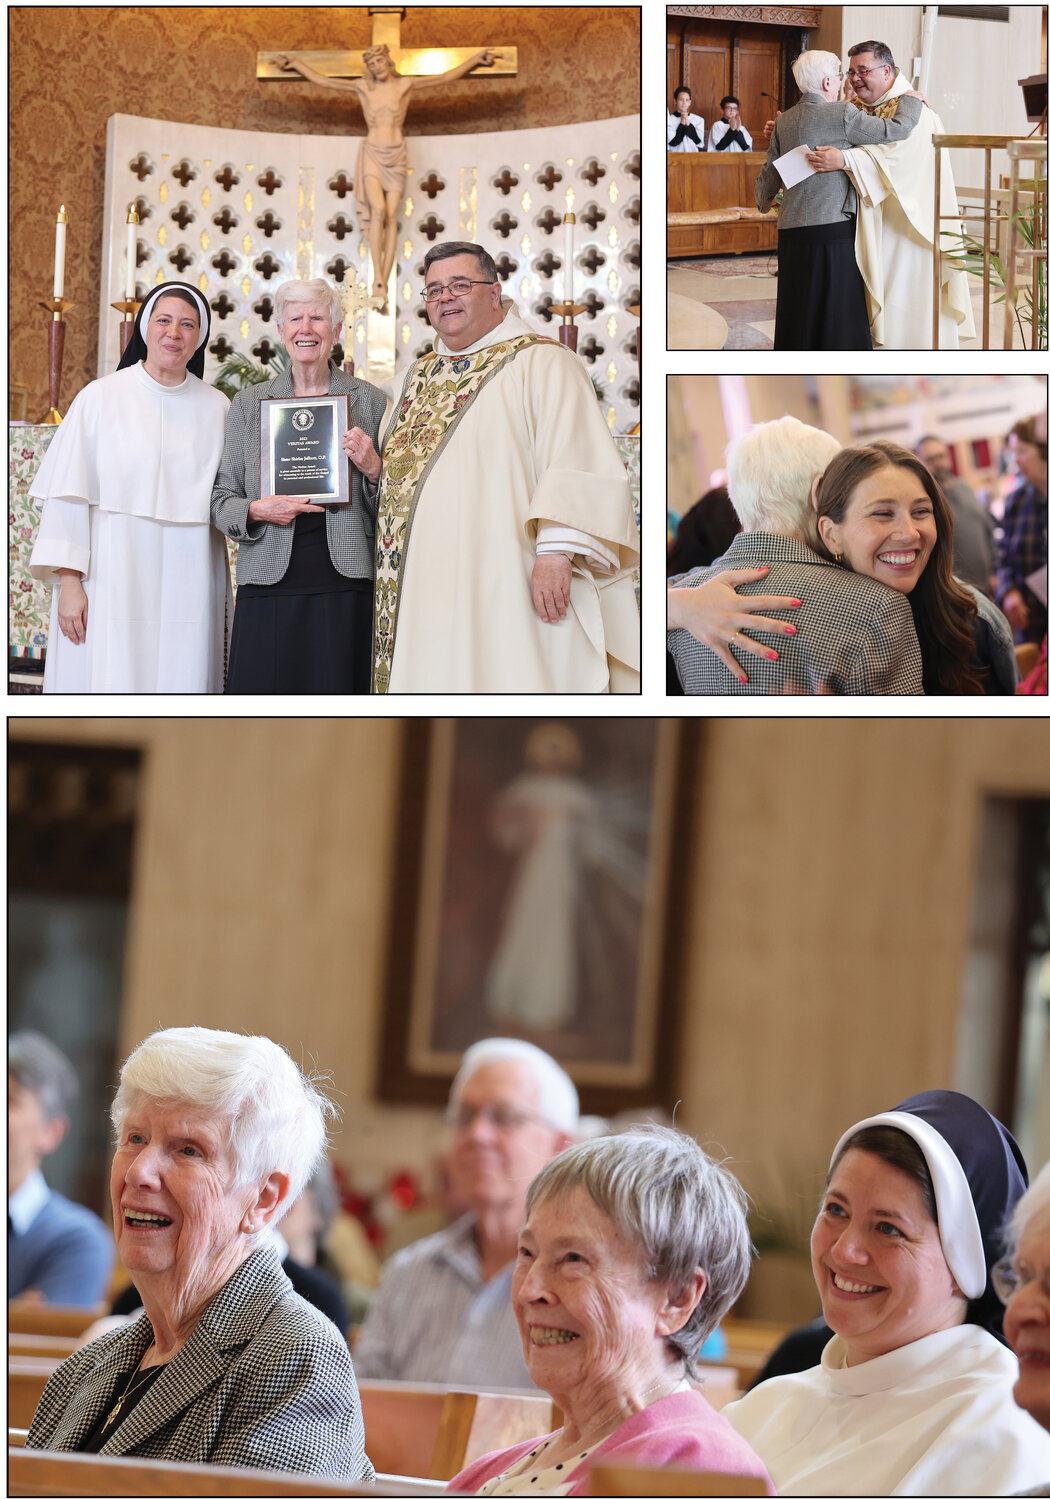 Lasting legacy: Above at left, St. Pius V School Principal Sister Josemaria Pence, O.P., left, and Father James Mary Sullivan, O.P., pastor, present the 2023 Veritas Award to Sister Shirley Jeffcott, O.P., in honor of her 40 years of service to the school and parish.

To view many more photos from this story, visit ricatholic.smugmug.com